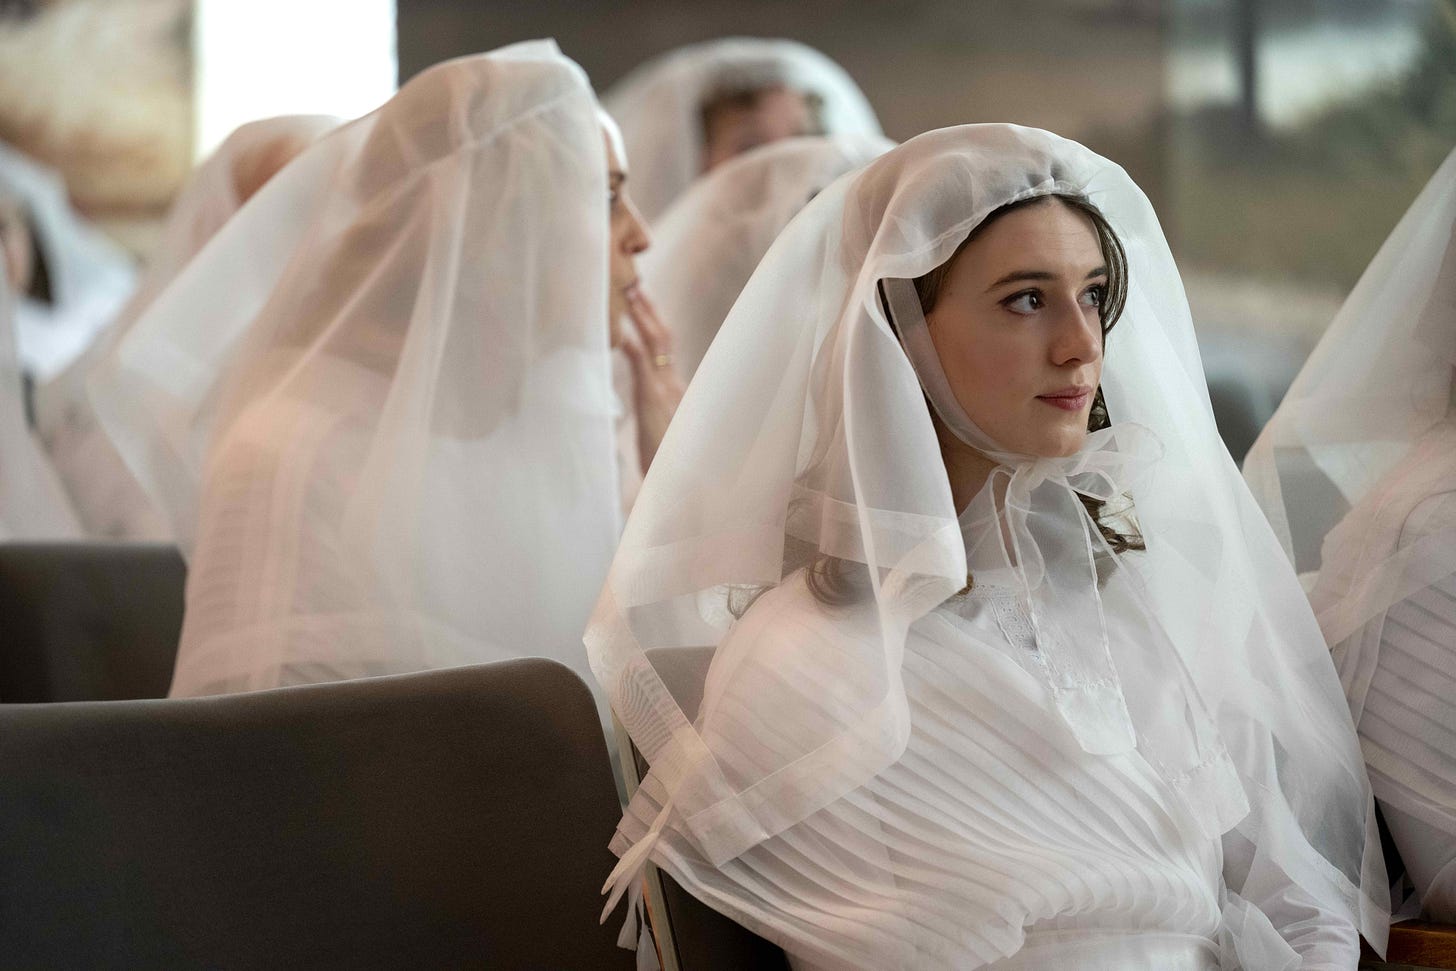 A young woman clad in the white robes and veil of the Mormon temple sits in sharp focus near the camera, while around her other similarly dressed women sit out of focus in other rows of seating.